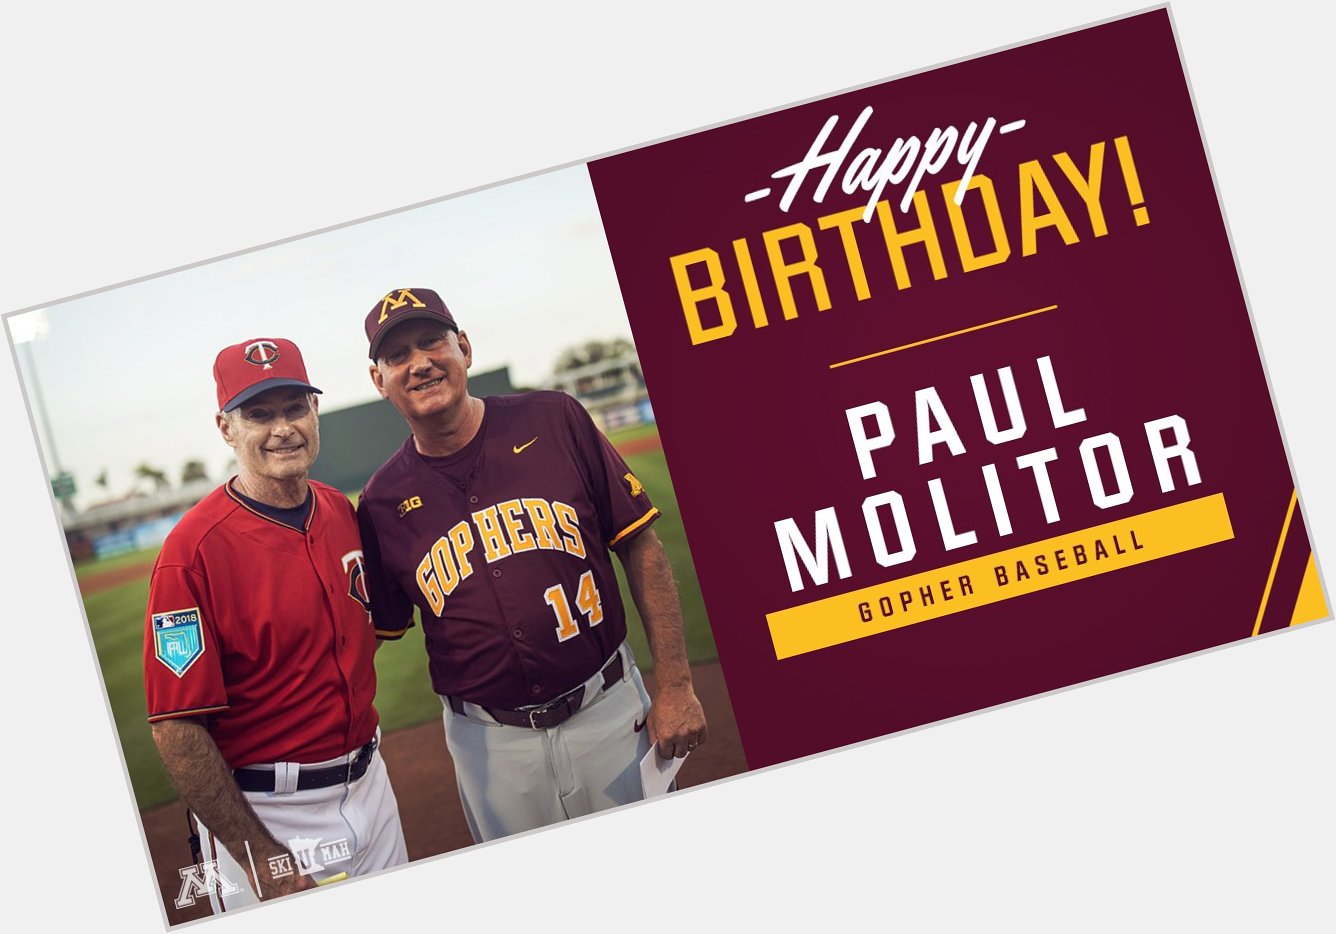 Saying to wish legend and manager Paul Molitor a very happy birthday today! 